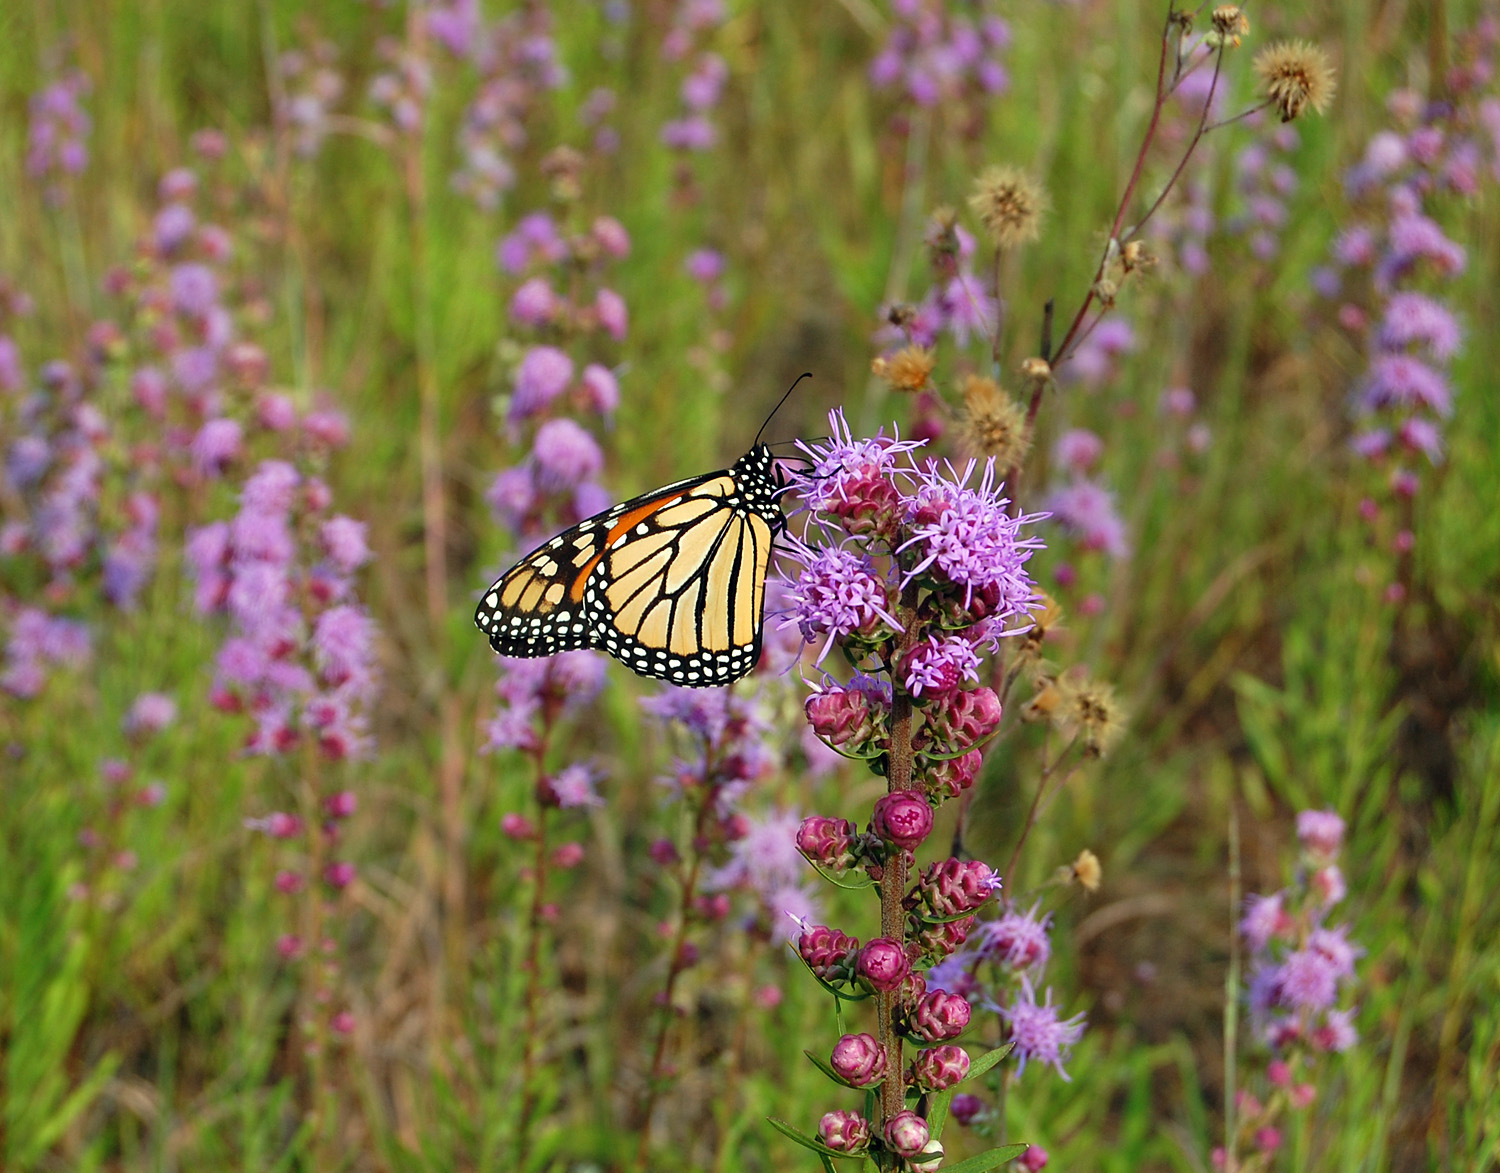 A monarch butterfly perches atop a stalk of purple flowers with thread-like petals sticking out in various directions.